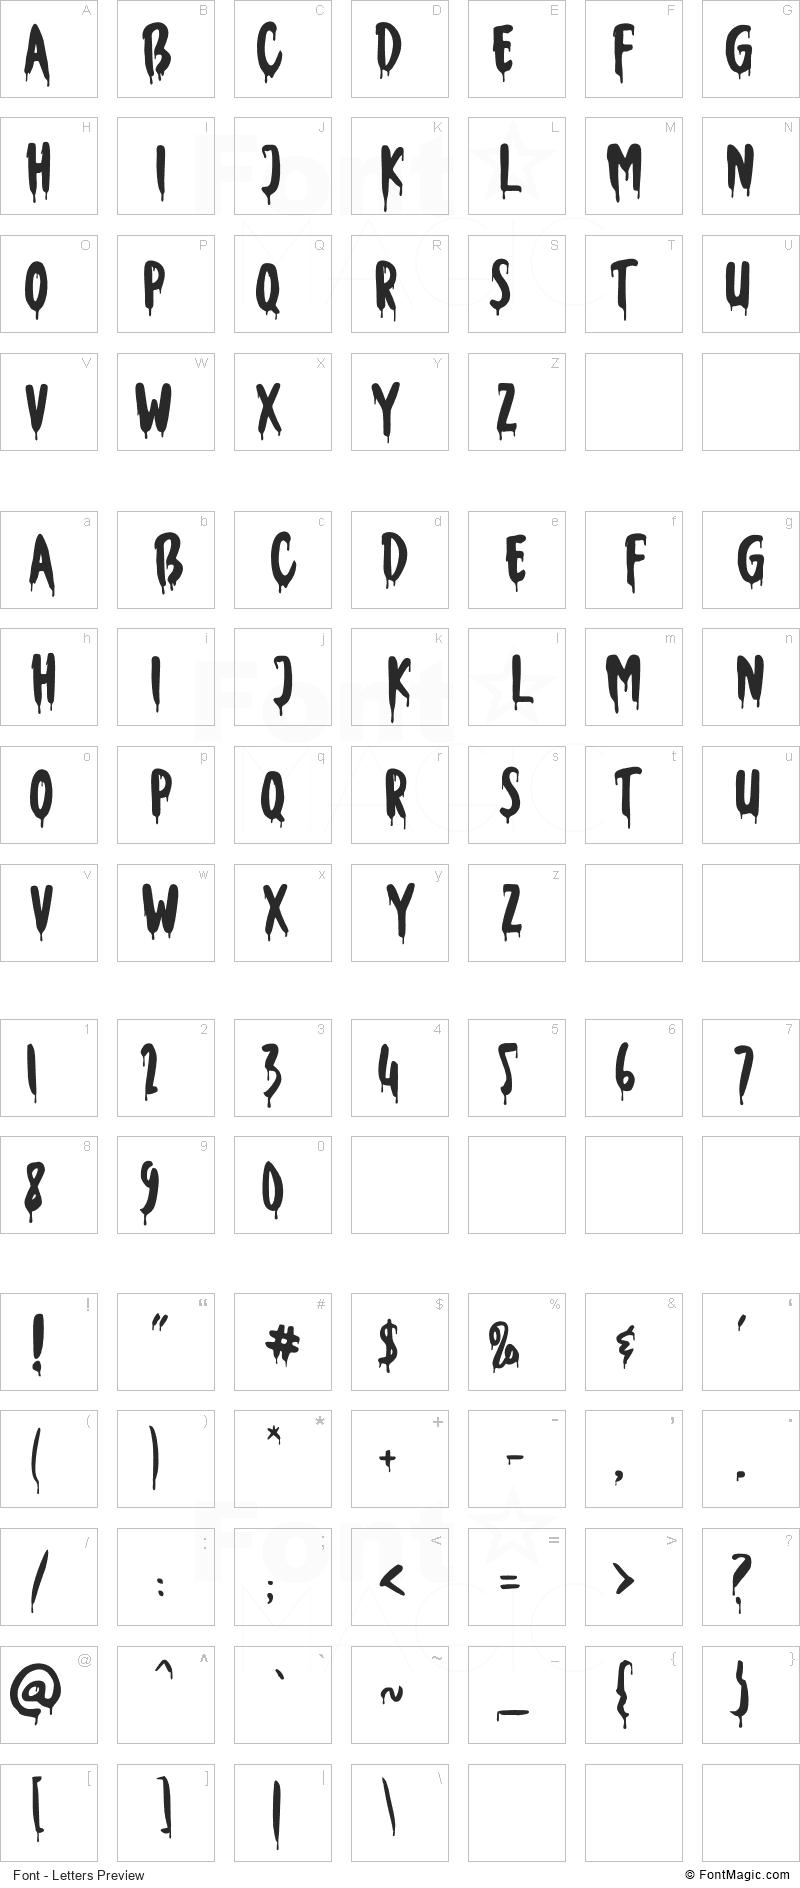 Wicked Tricker Font - All Latters Preview Chart